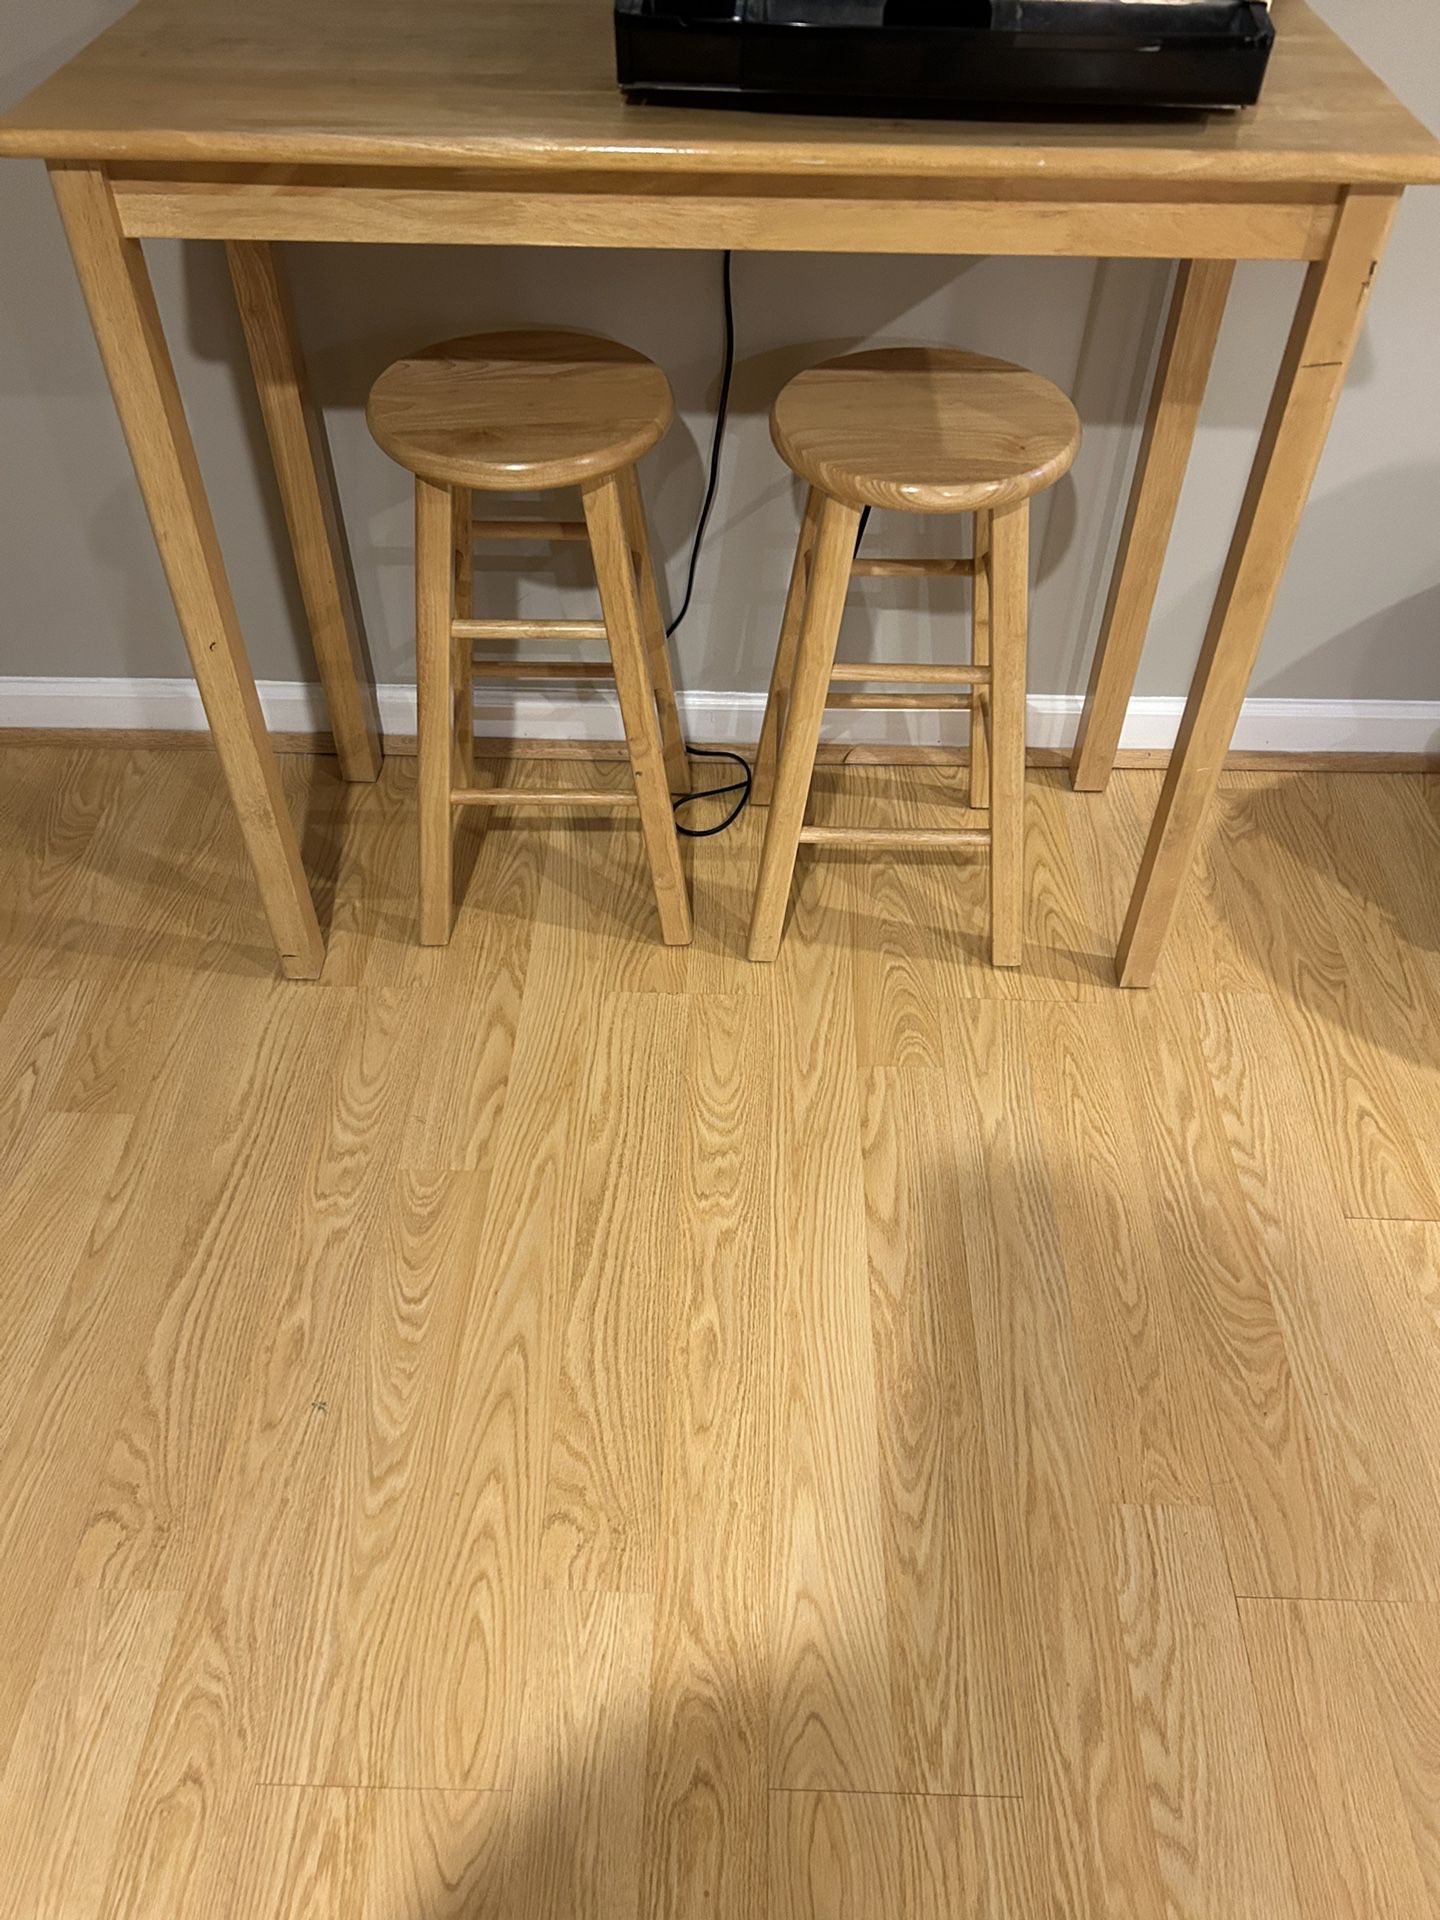 Wooden Table With Barstools 